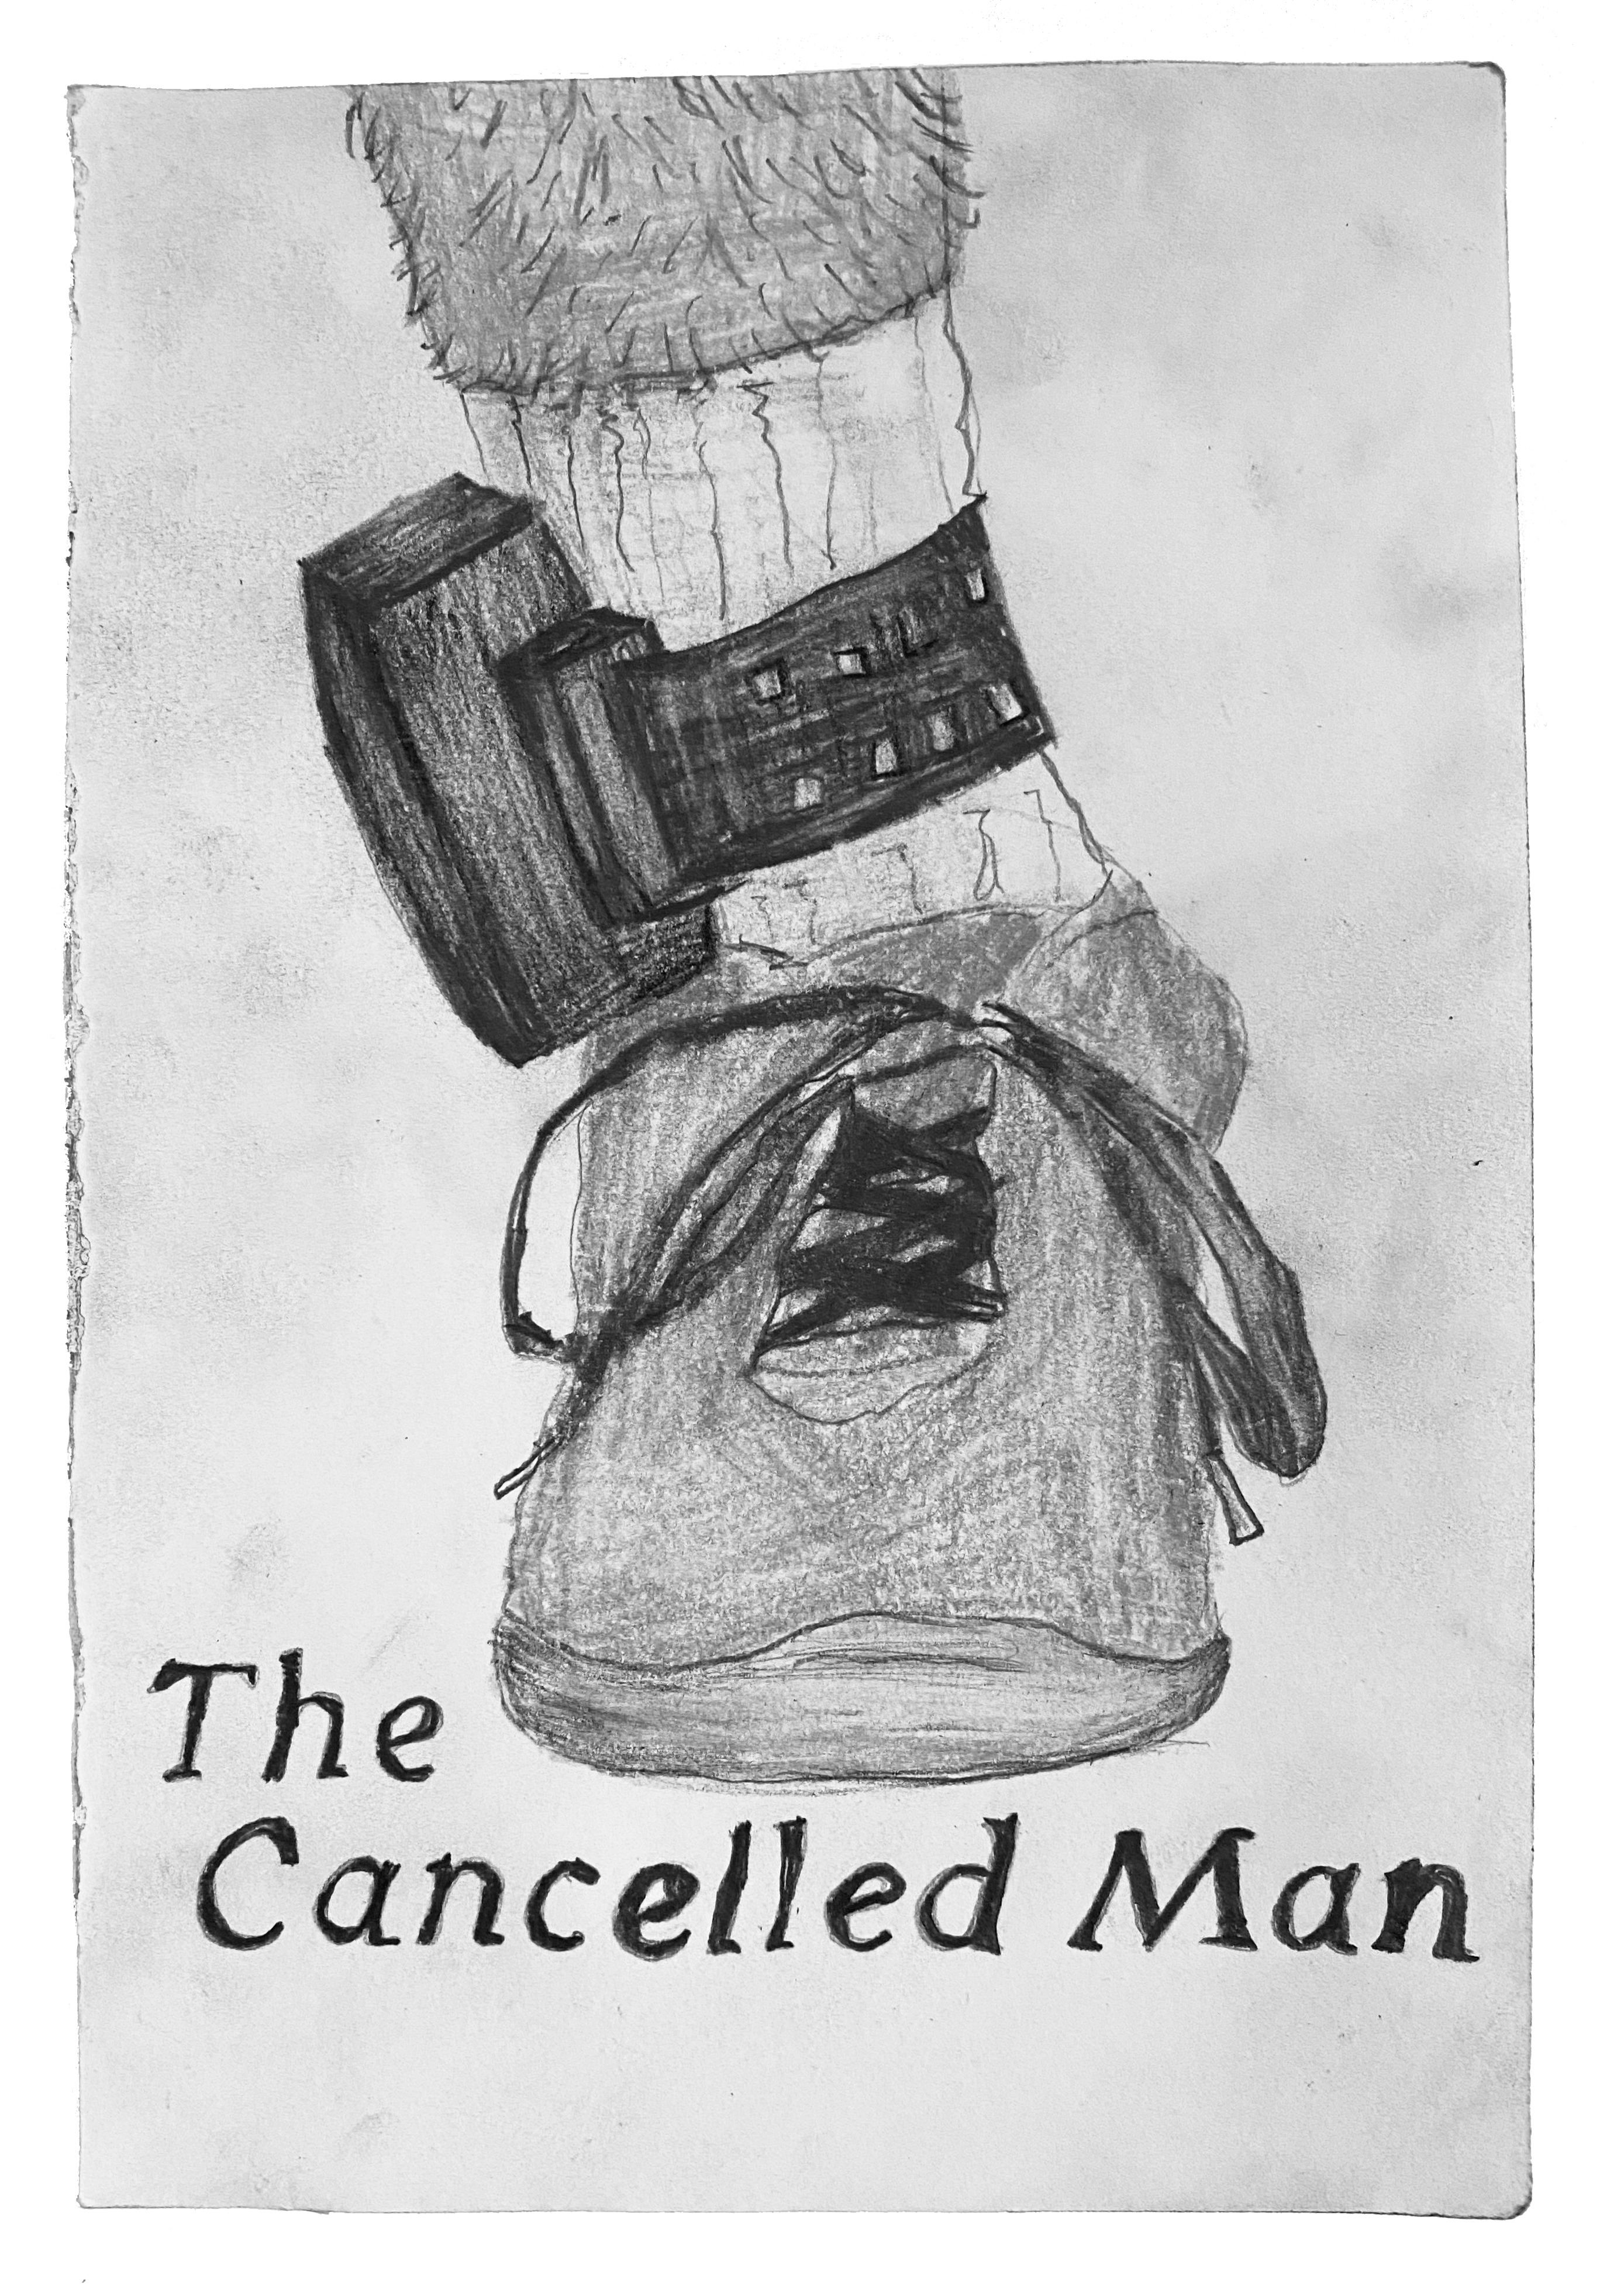 The Cancelled Man